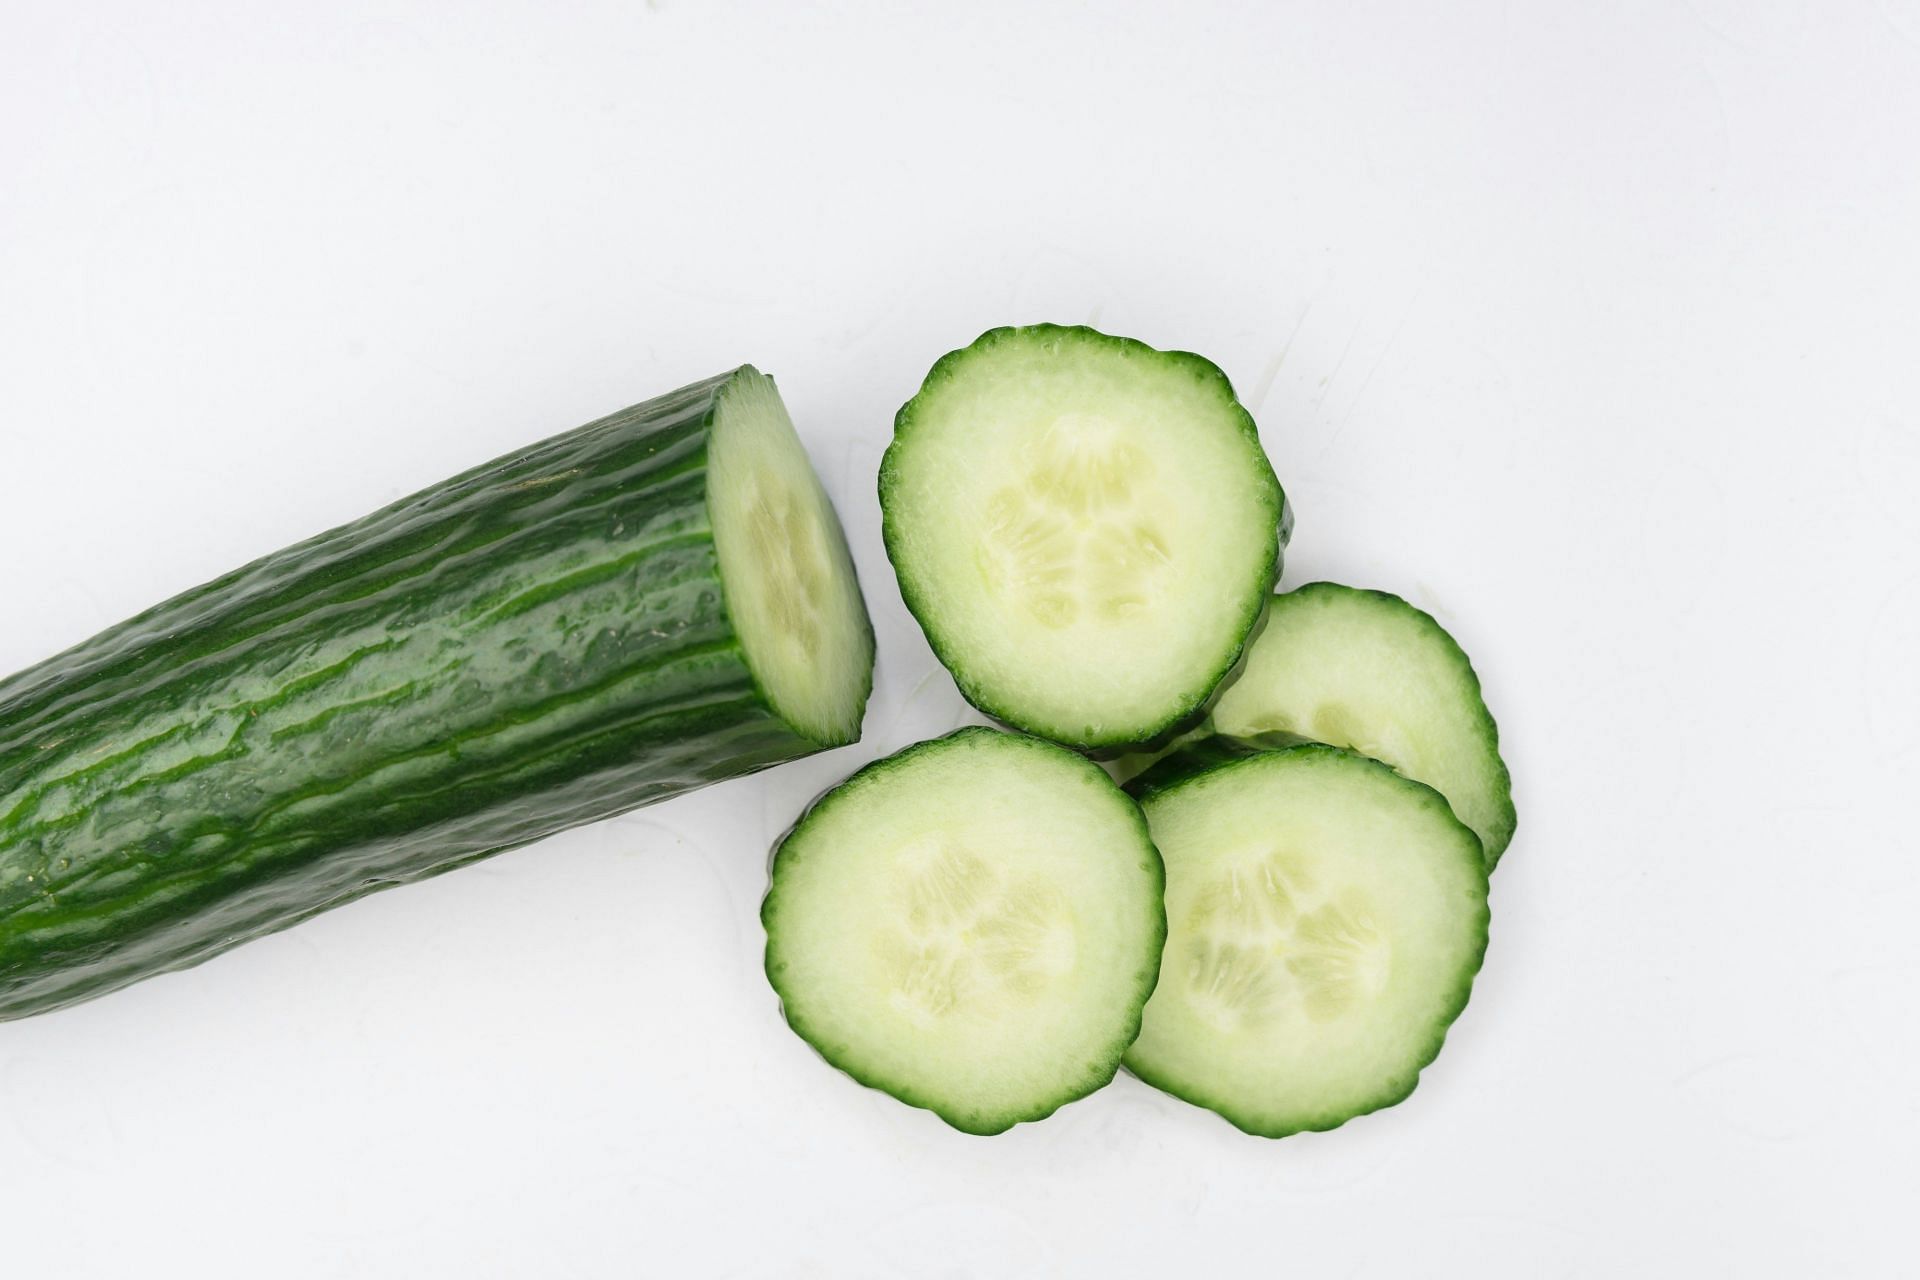 Cucumber has almost no calories and mostly consists of water (Image by Markus Winkler/Unsplash)